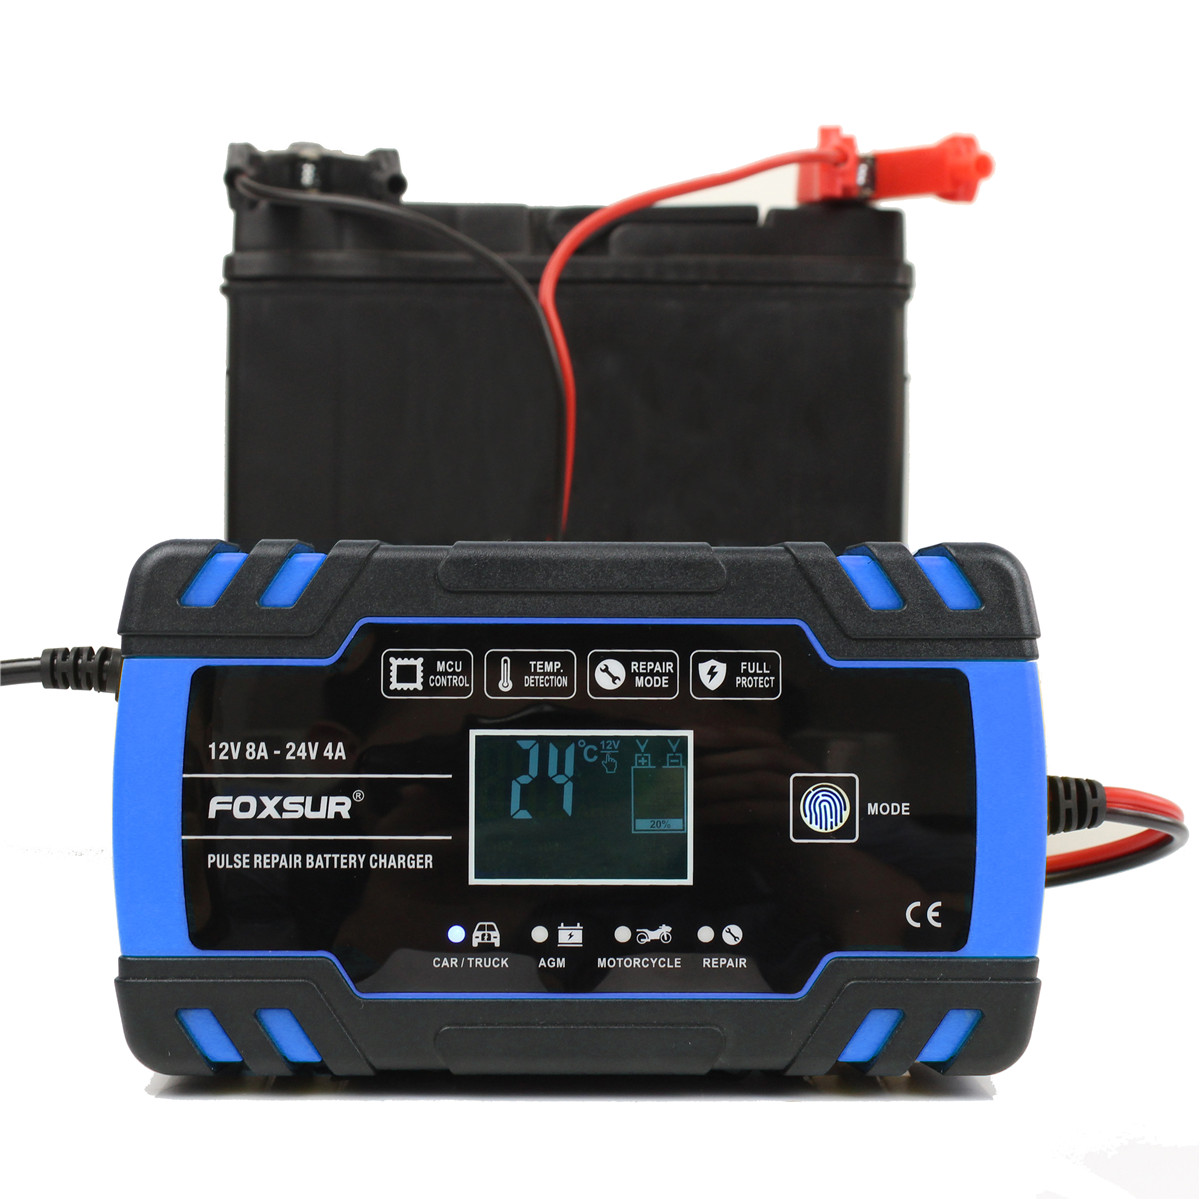 FOXSUR 12/24V 8A/4A Touch Screen Pulse Repair LCD Battery Charger Blue For Car Motorcycle Lead Acid Battery Agm Gel Wet